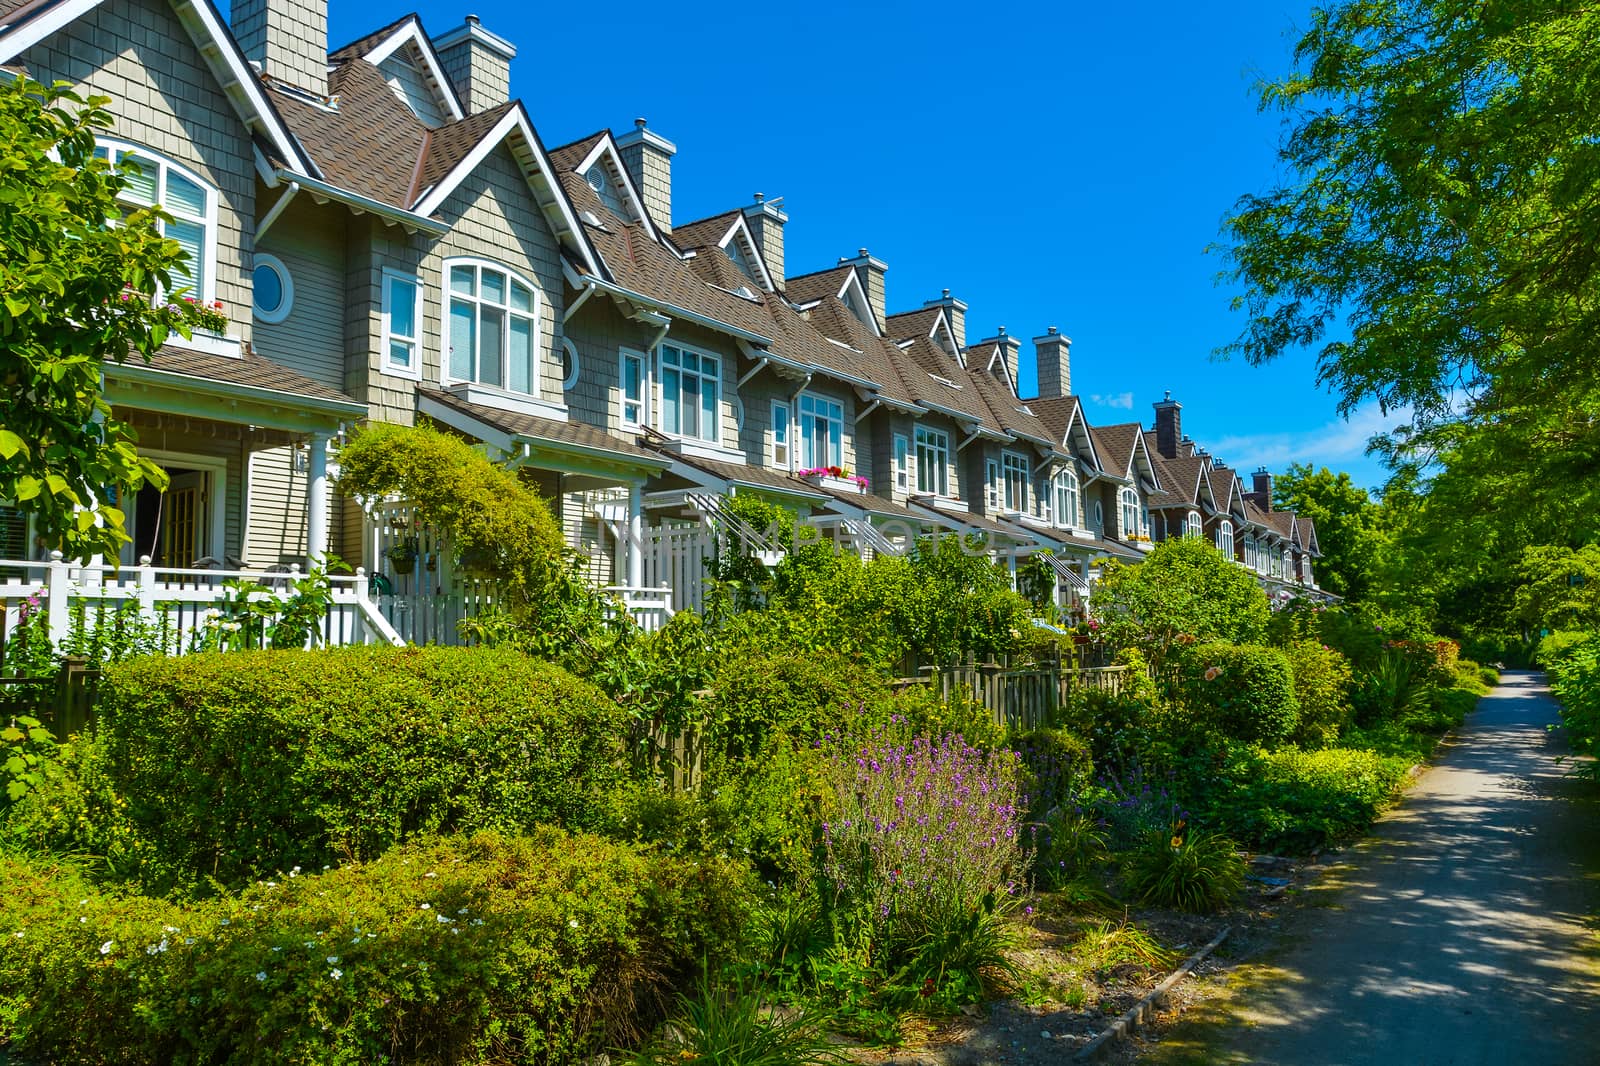 Residential townhouses on sunny day in Vancouver, British Columbia, Canada